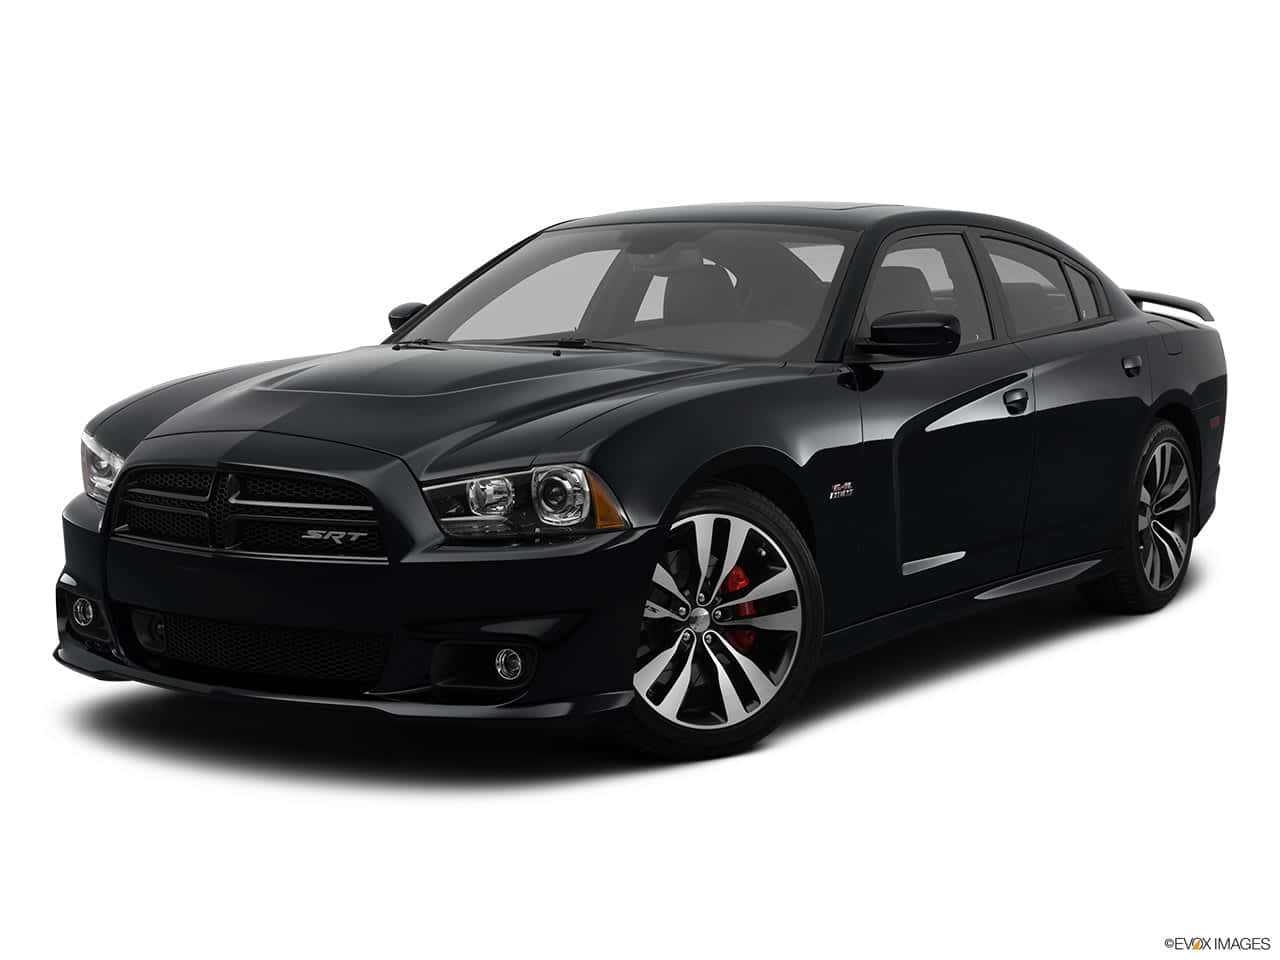 Turn Heads with the Edgy Design of the Dodge